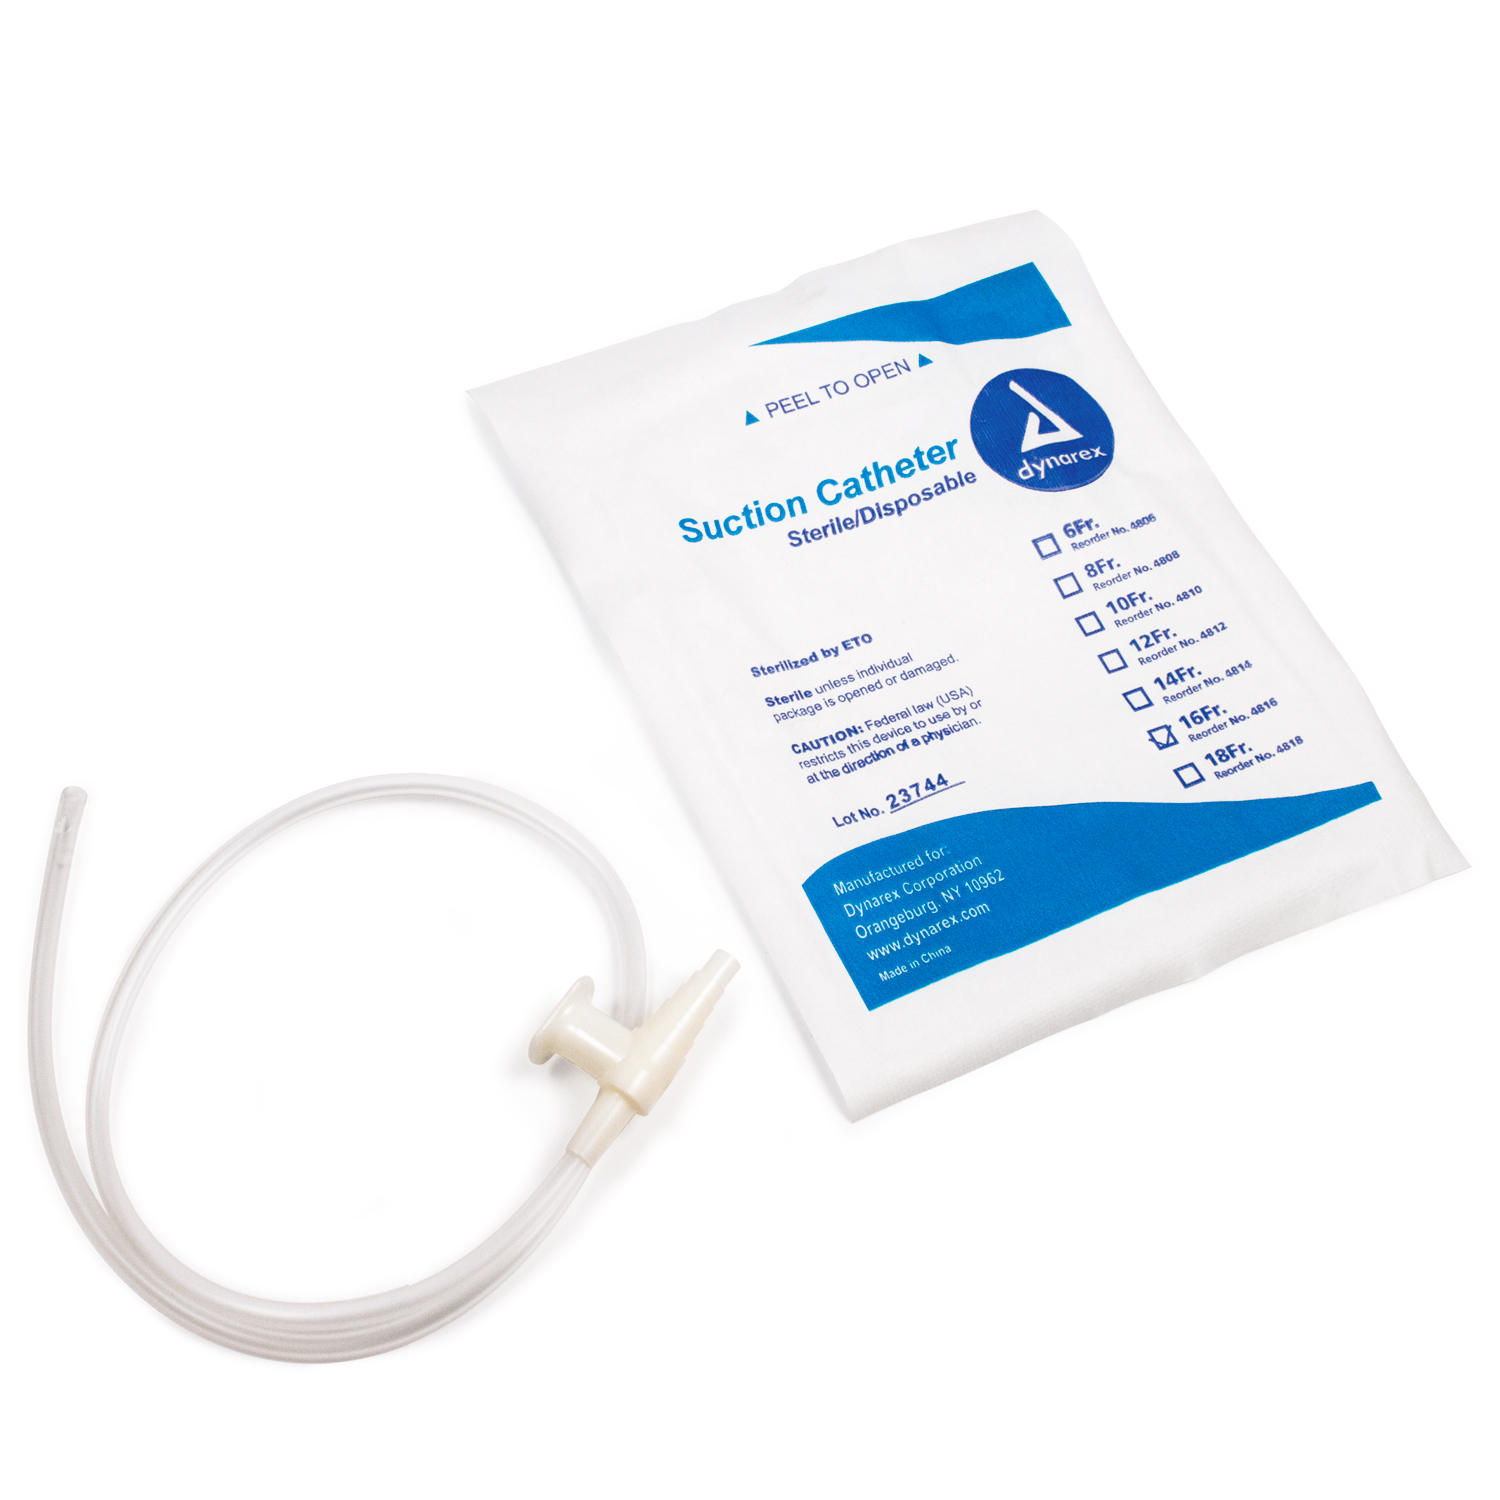 Suction Catheters Sterile - 16 Fr - 50 Units